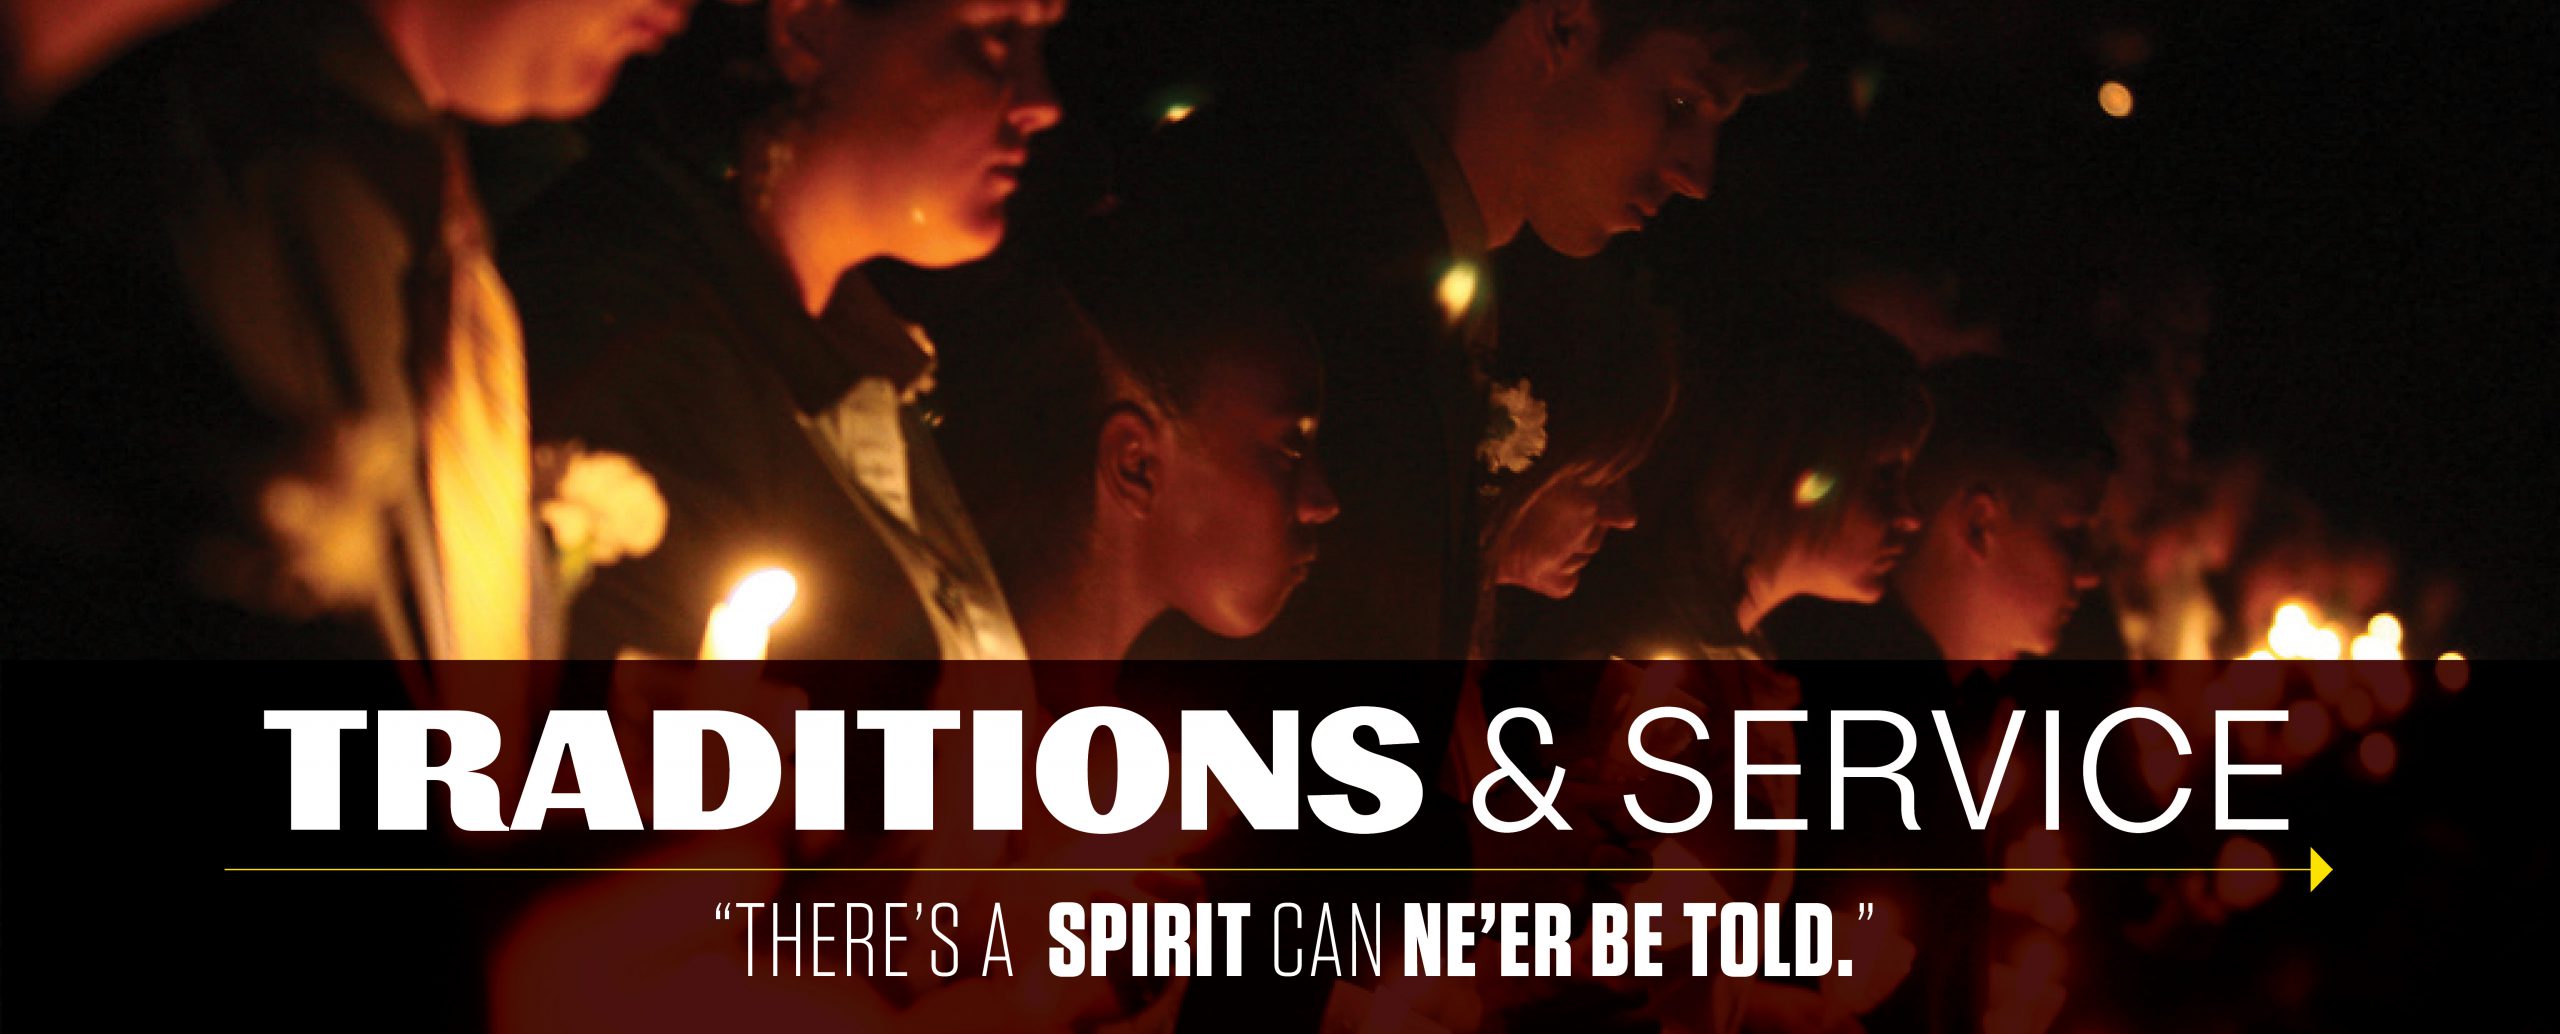 Students gathering together with candles with a graphic displayed over that reads "Traditions & Service; There's a spirit can ne'er be told." 